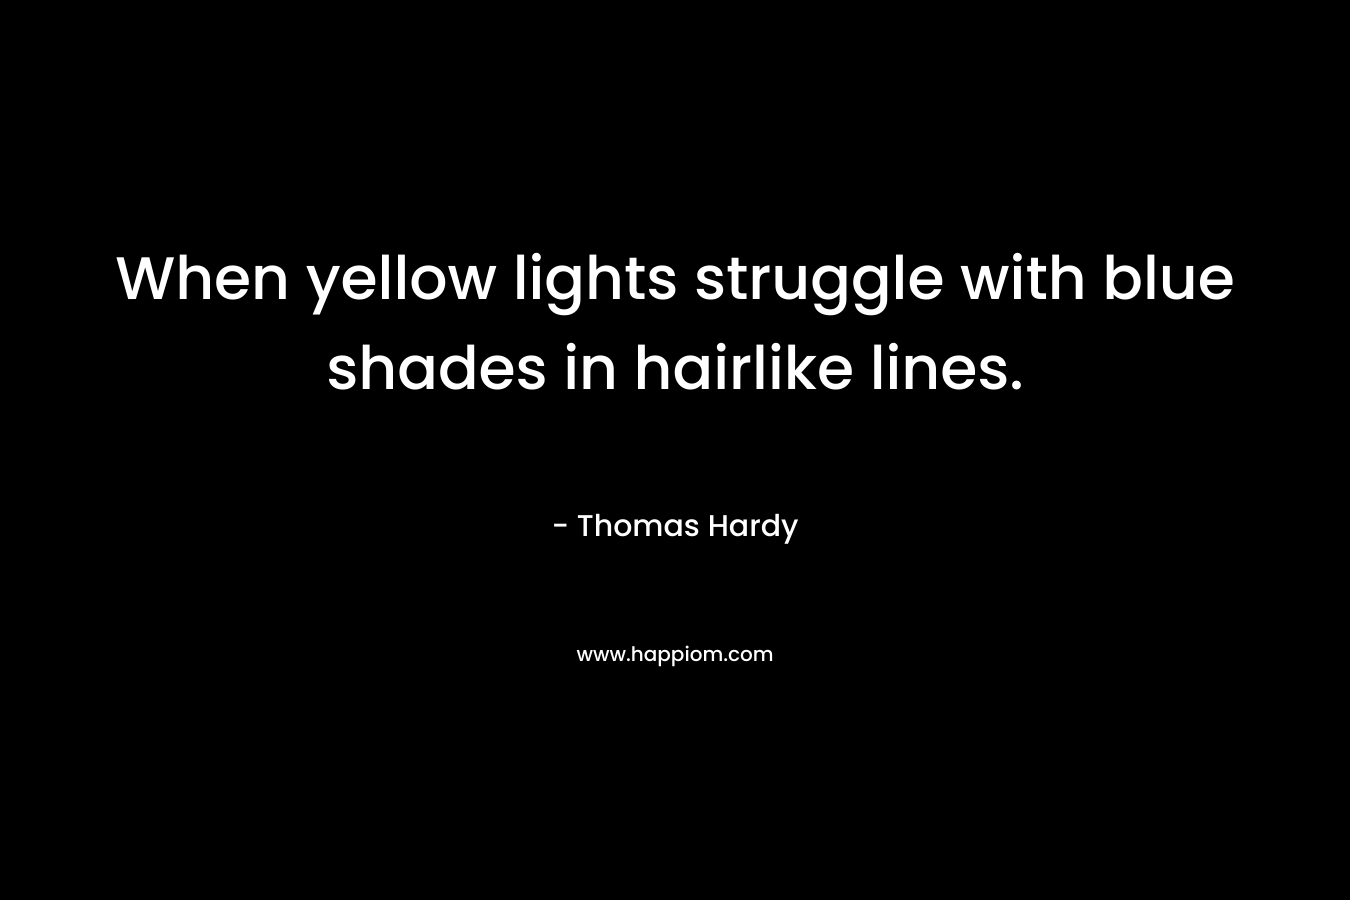 When yellow lights struggle with blue shades in hairlike lines. – Thomas Hardy